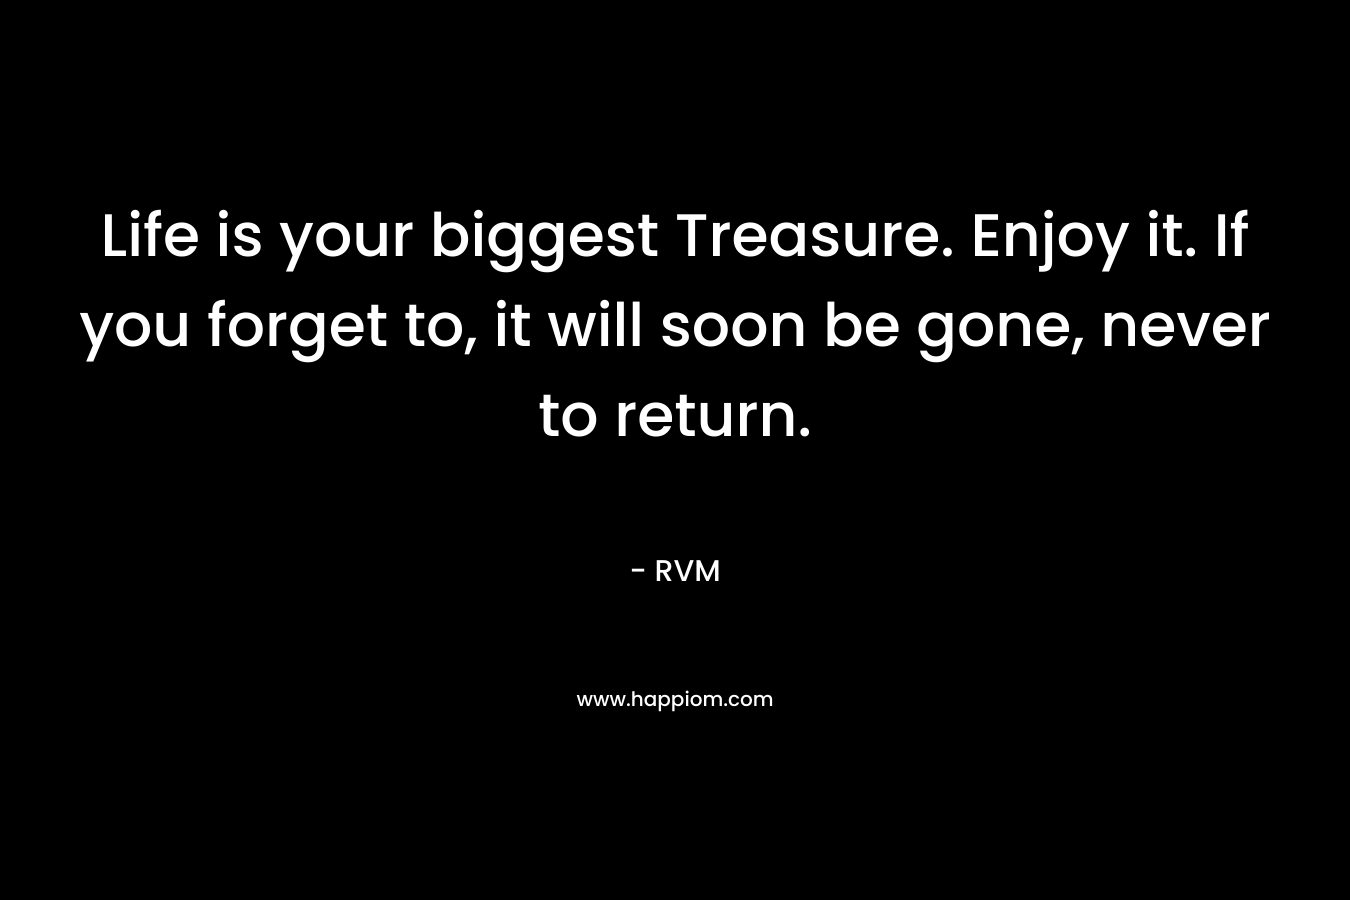 Life is your biggest Treasure. Enjoy it. If you forget to, it will soon be gone, never to return.